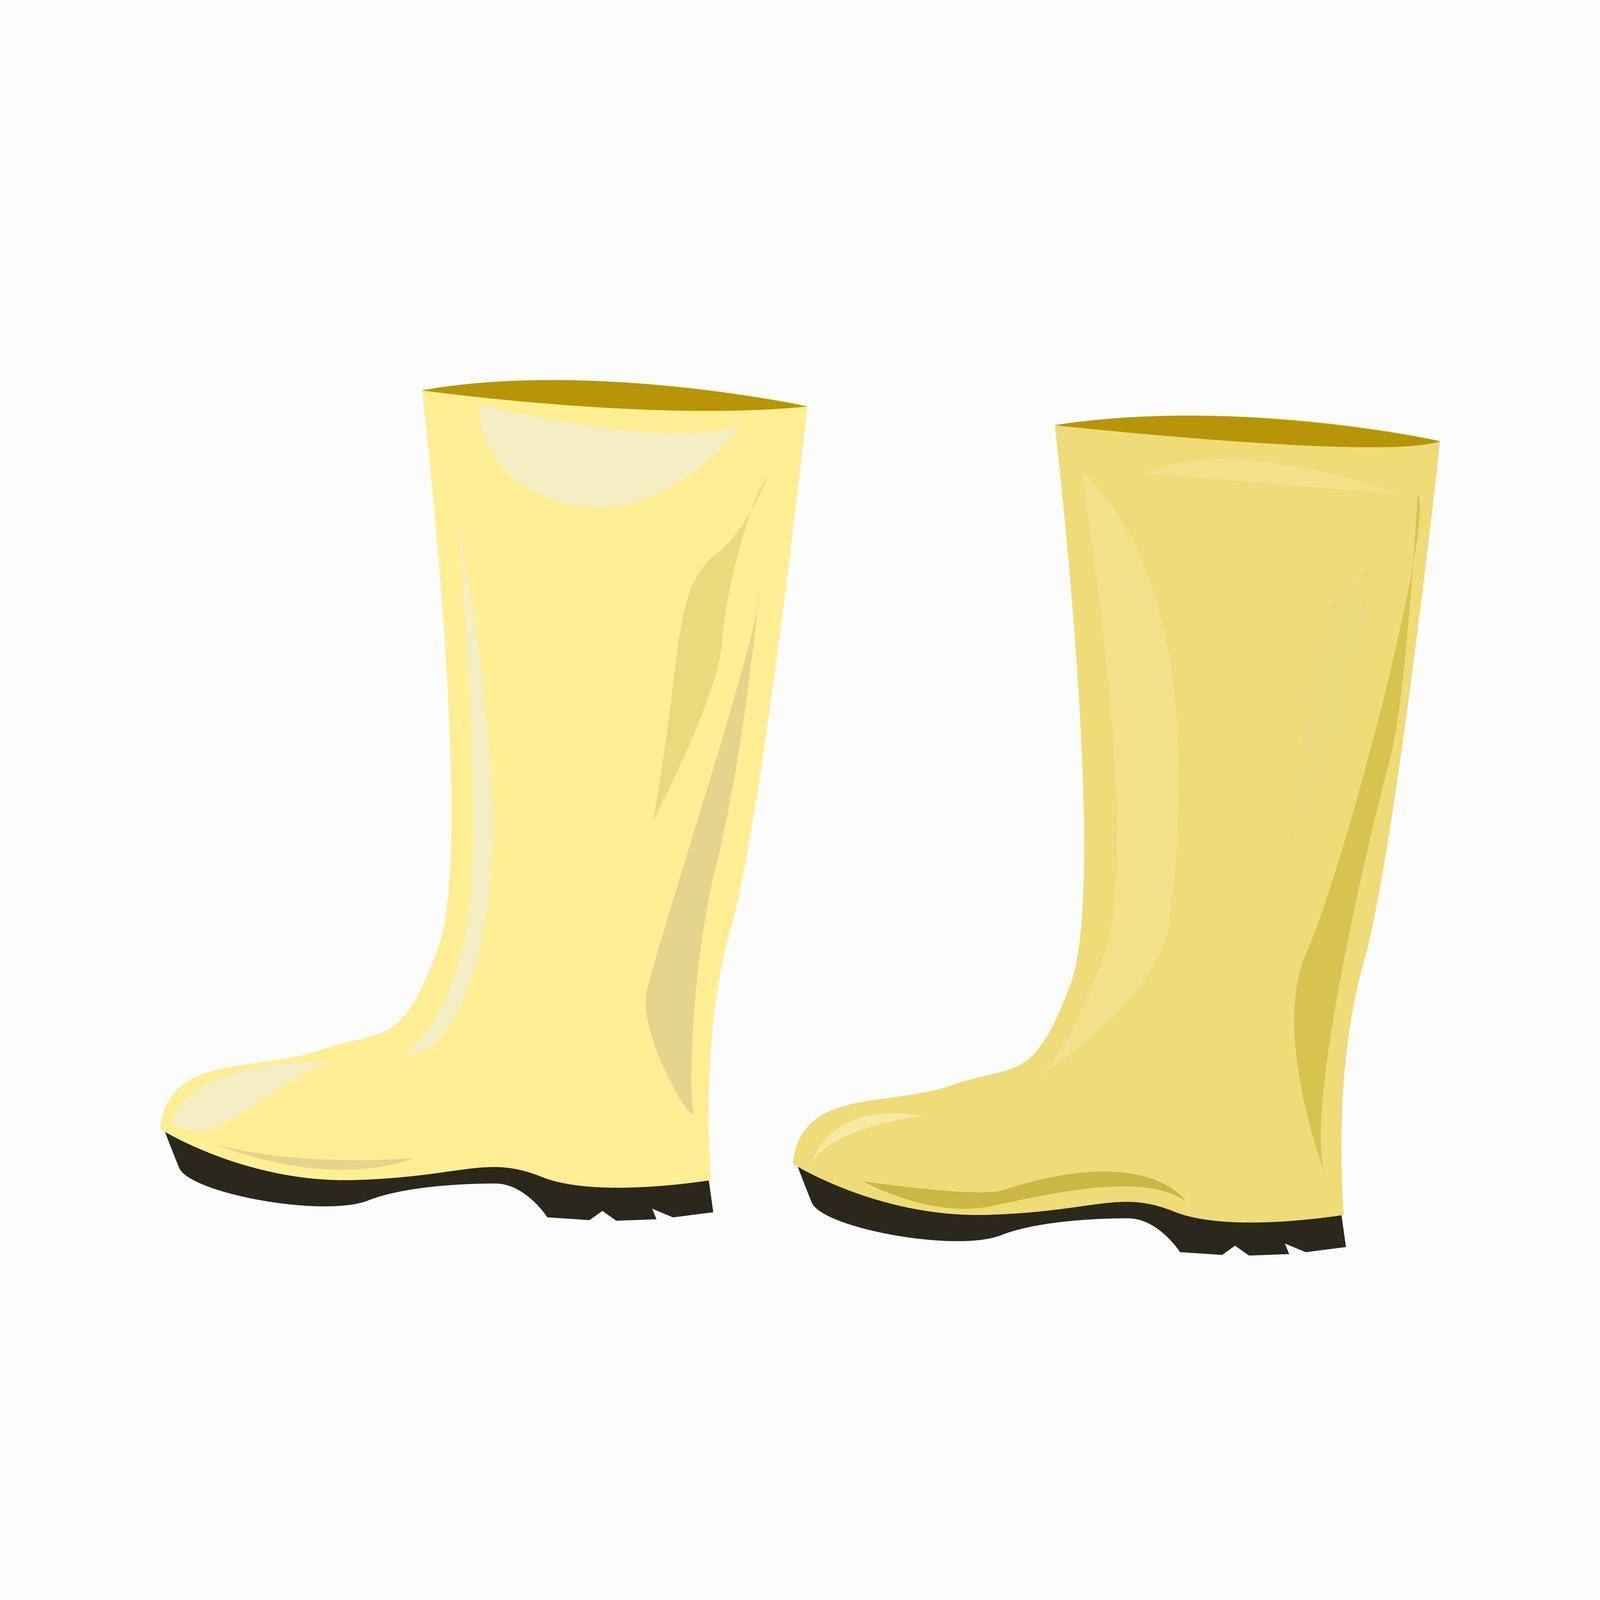 A pair of lemon yellow rubber boots. Isolated element on a white background